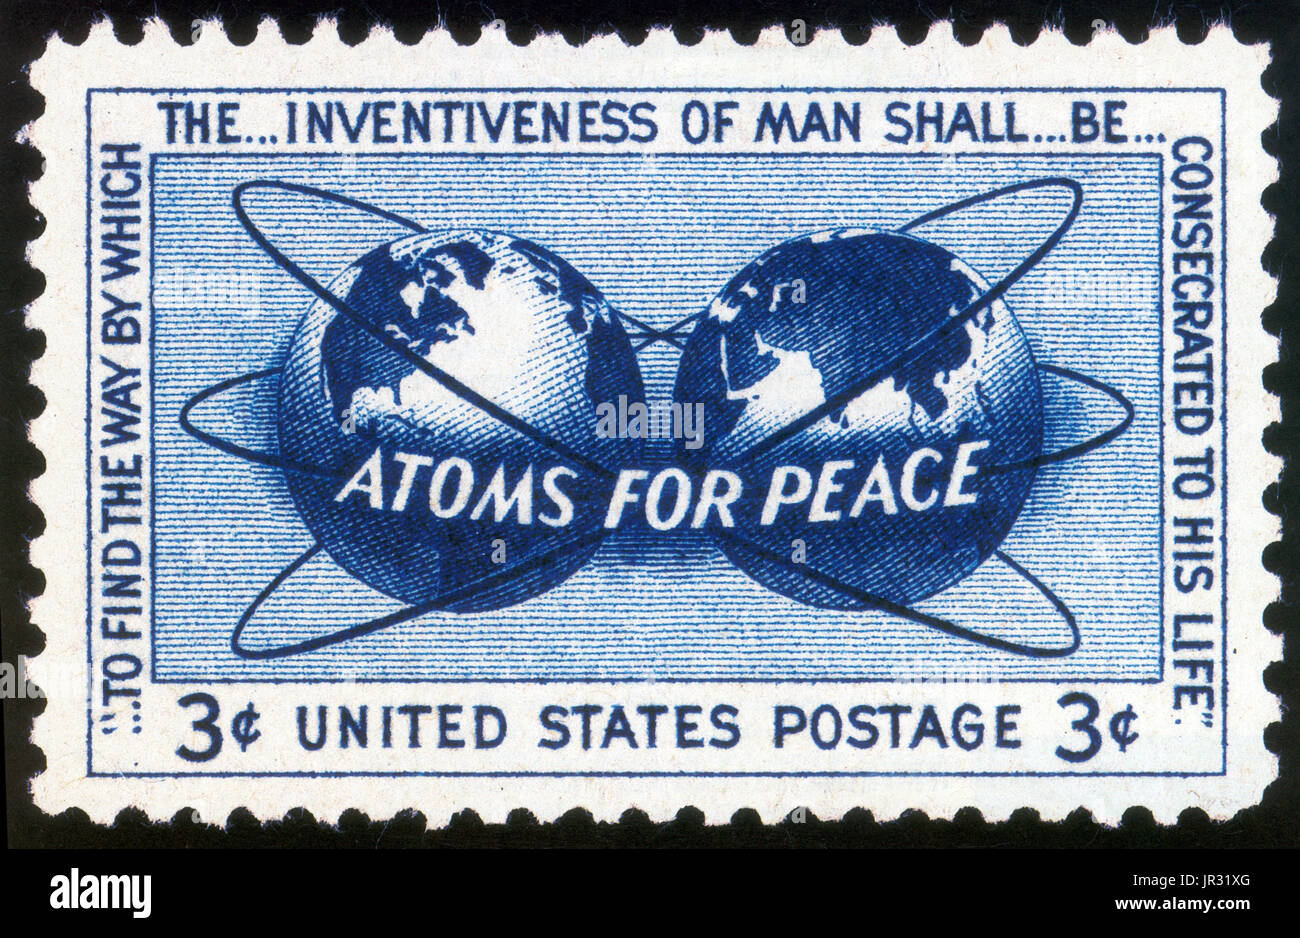 Atoms for Peace,U.S. Postage Stamp,1955 Stock Photo